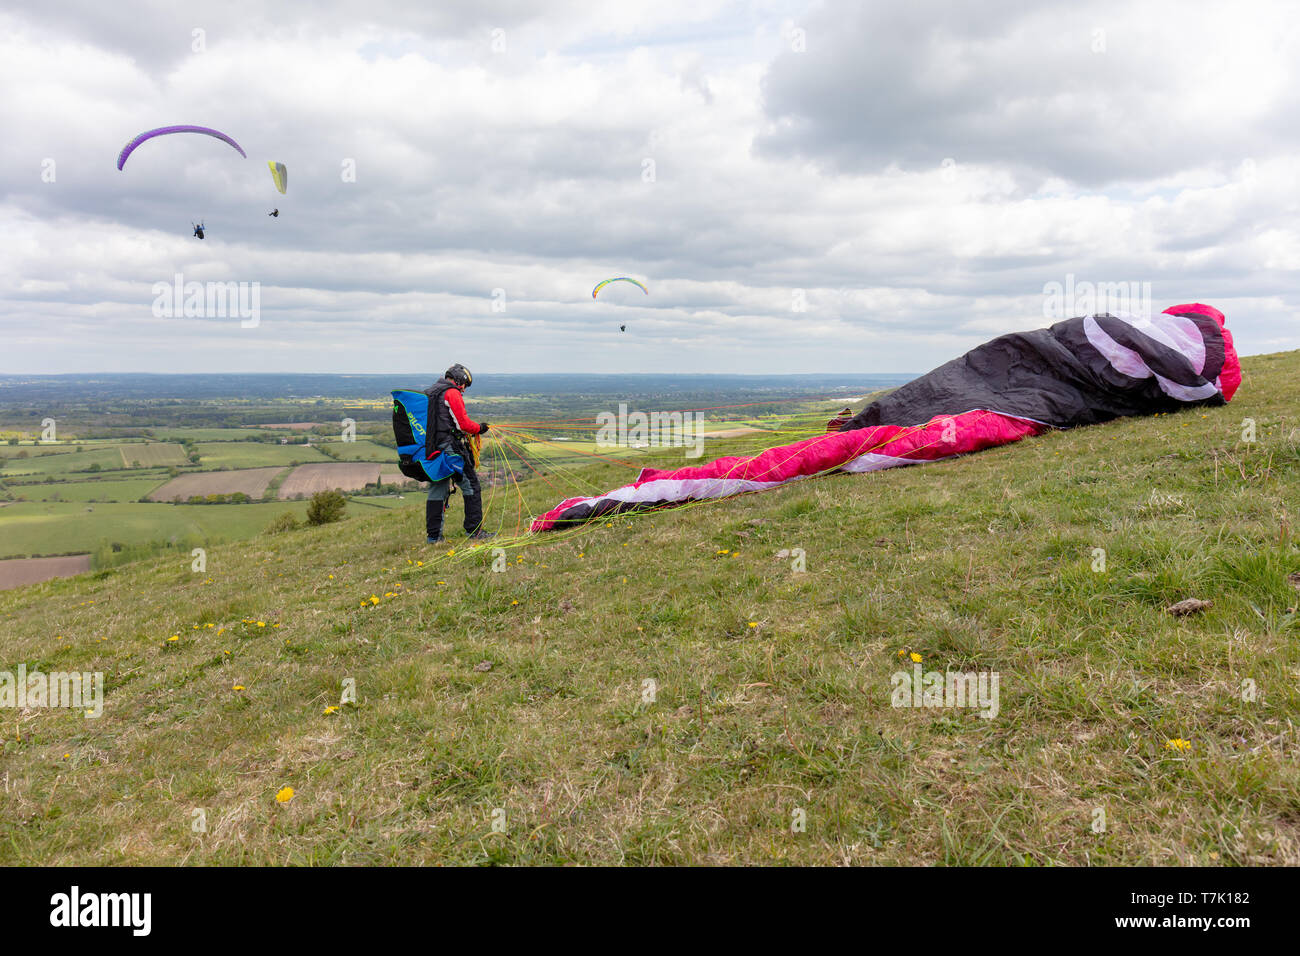 Devils Dyke, Sussex, UK; 6th May 2019; Male Paraglider Standing Next to his Collapsed Canopy. Three Paragliders Flying in the Background Stock Photo